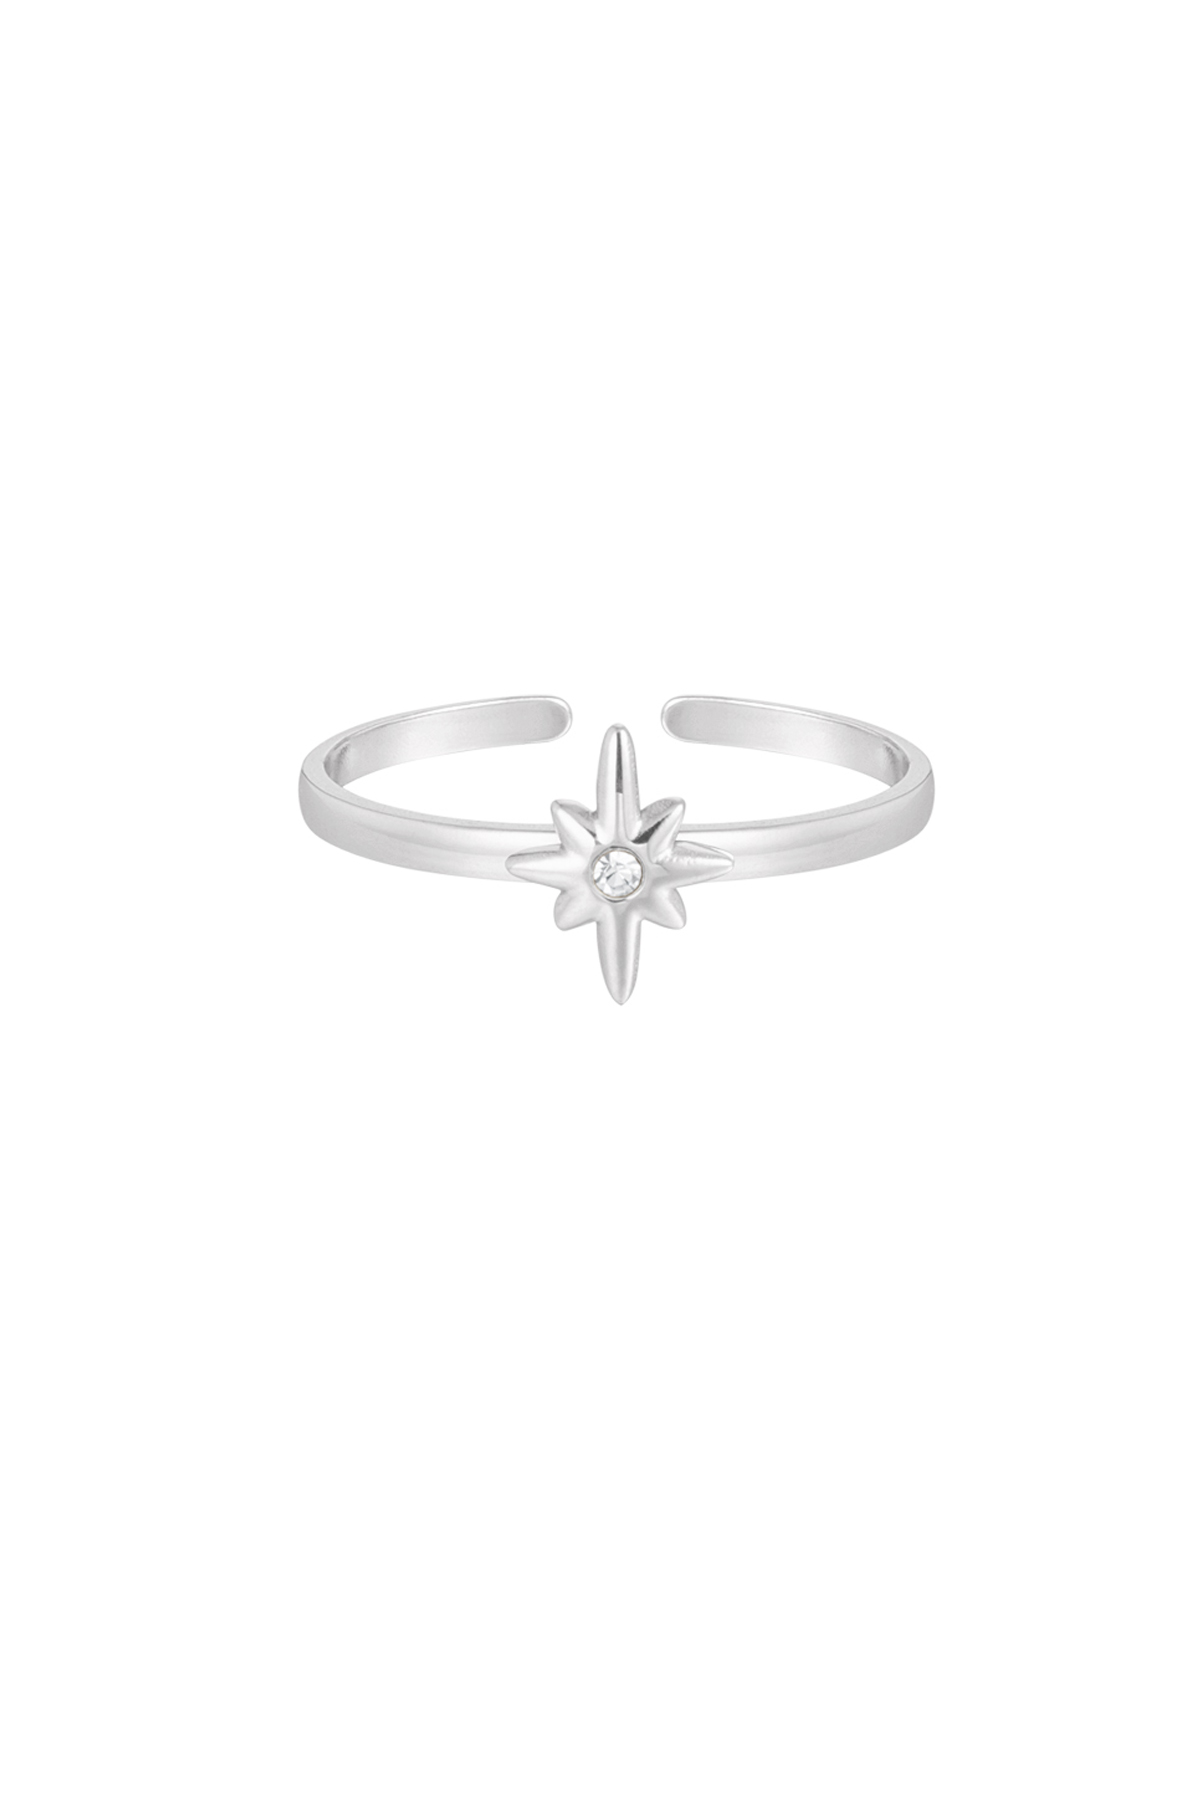 Ring star with stone - silver h5 